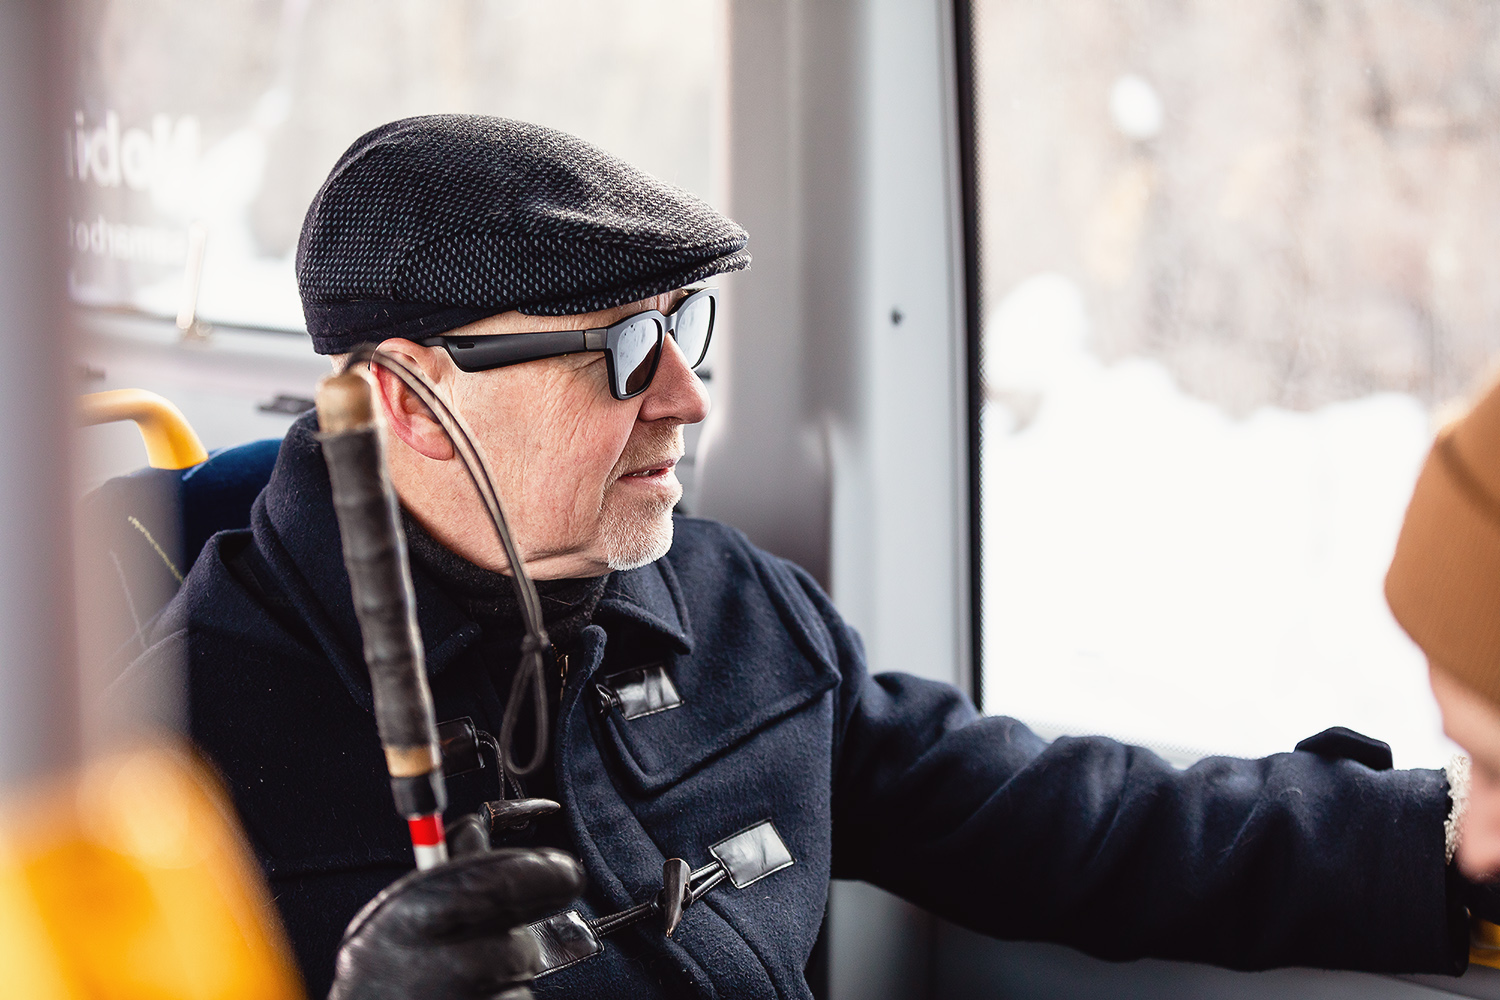 Passenger on bus with white cane and glasses